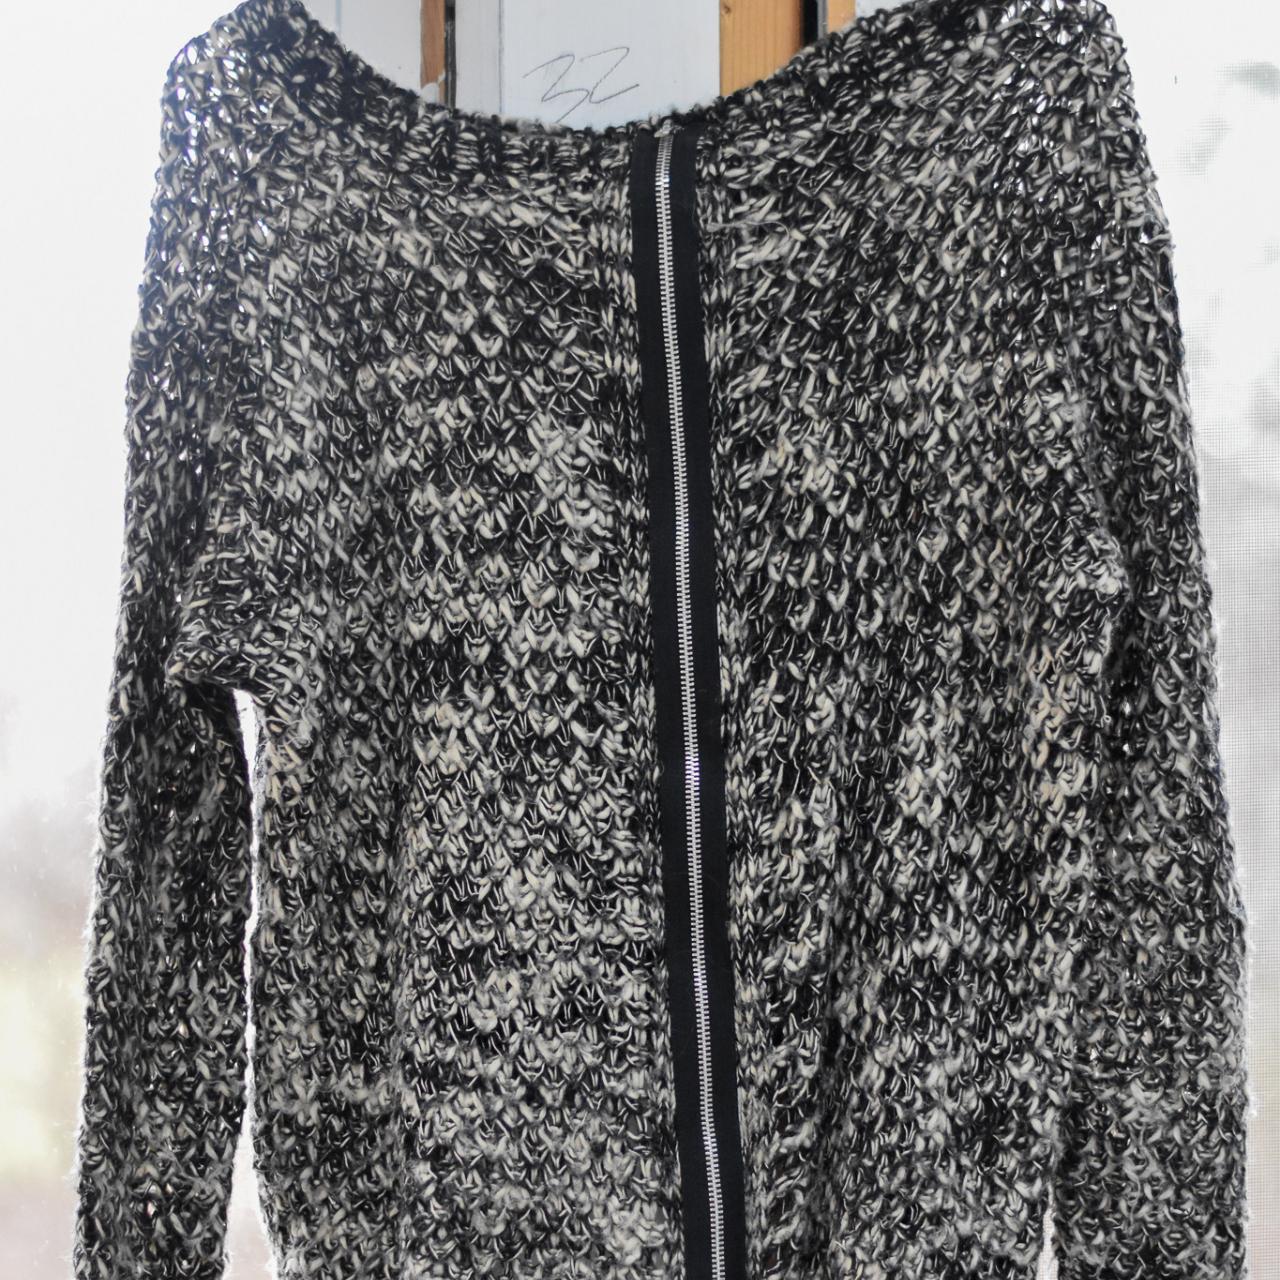 Product Image 2 - ✨ Gorgeous marbled black-and-white knit